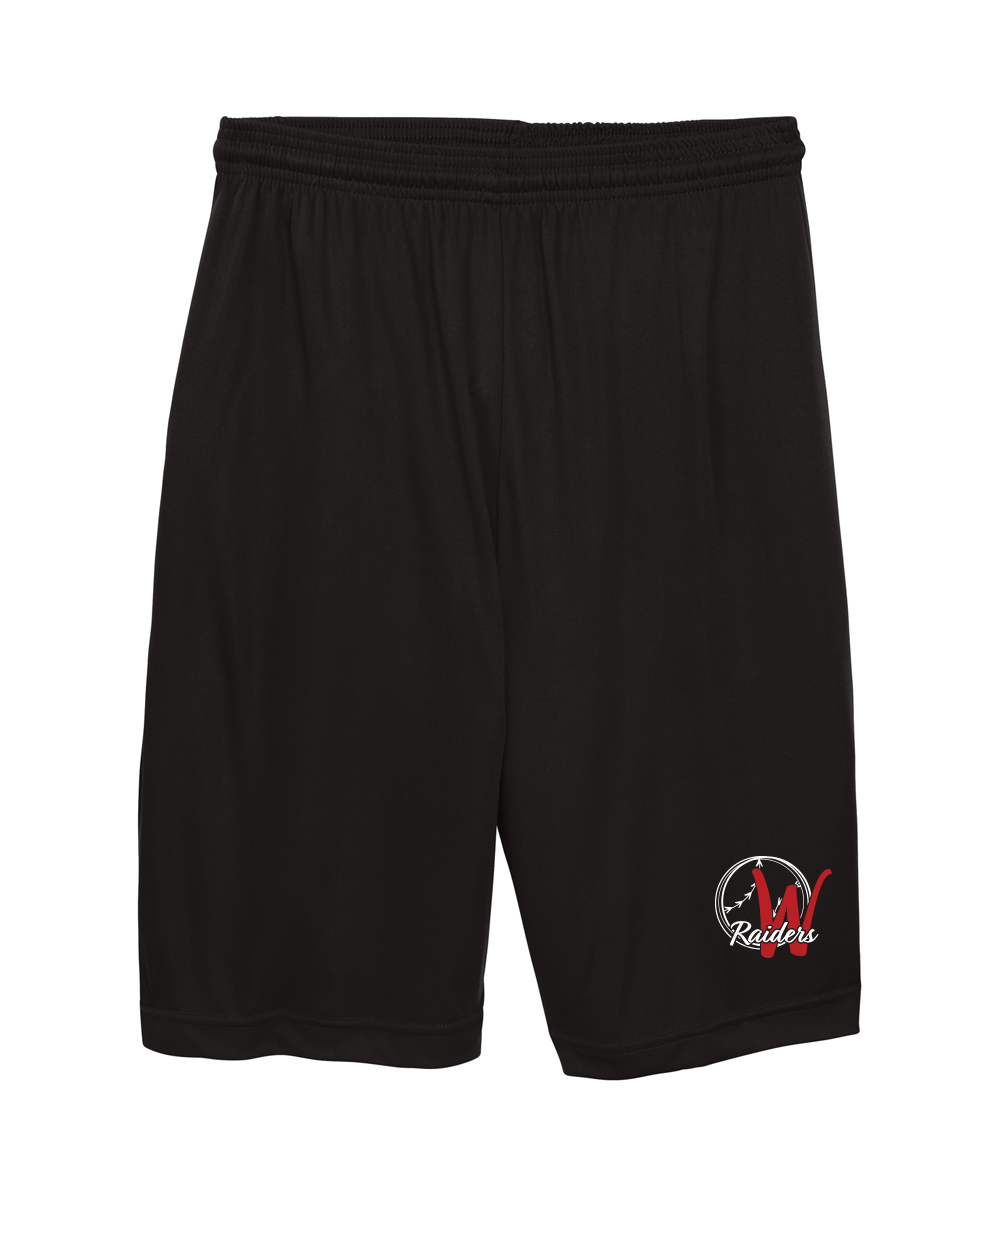 WGSA - Sport-Yek Youth PosiCharge Competitor Short